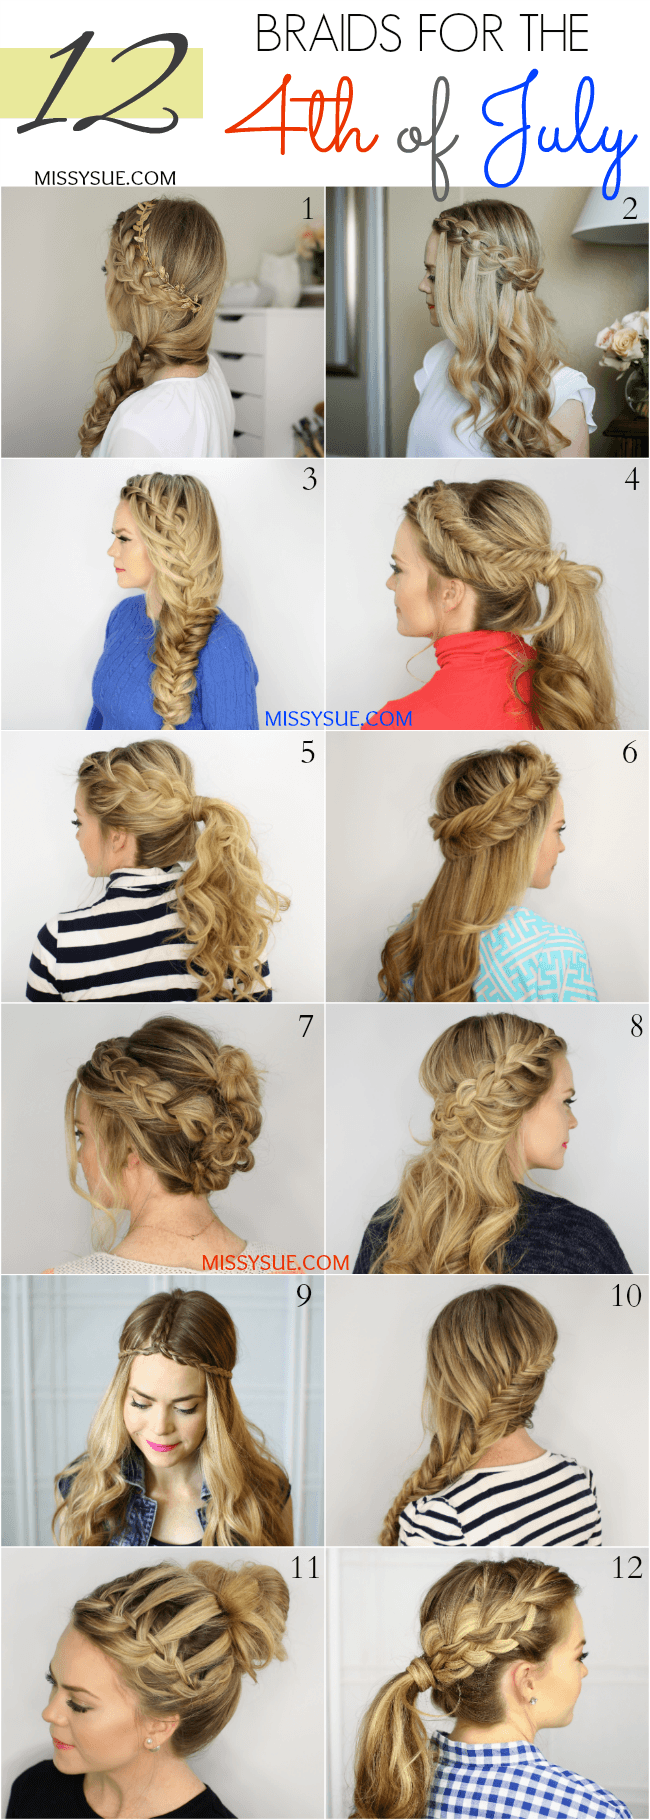 12 Braids for the Fourth of July | MissySue.com